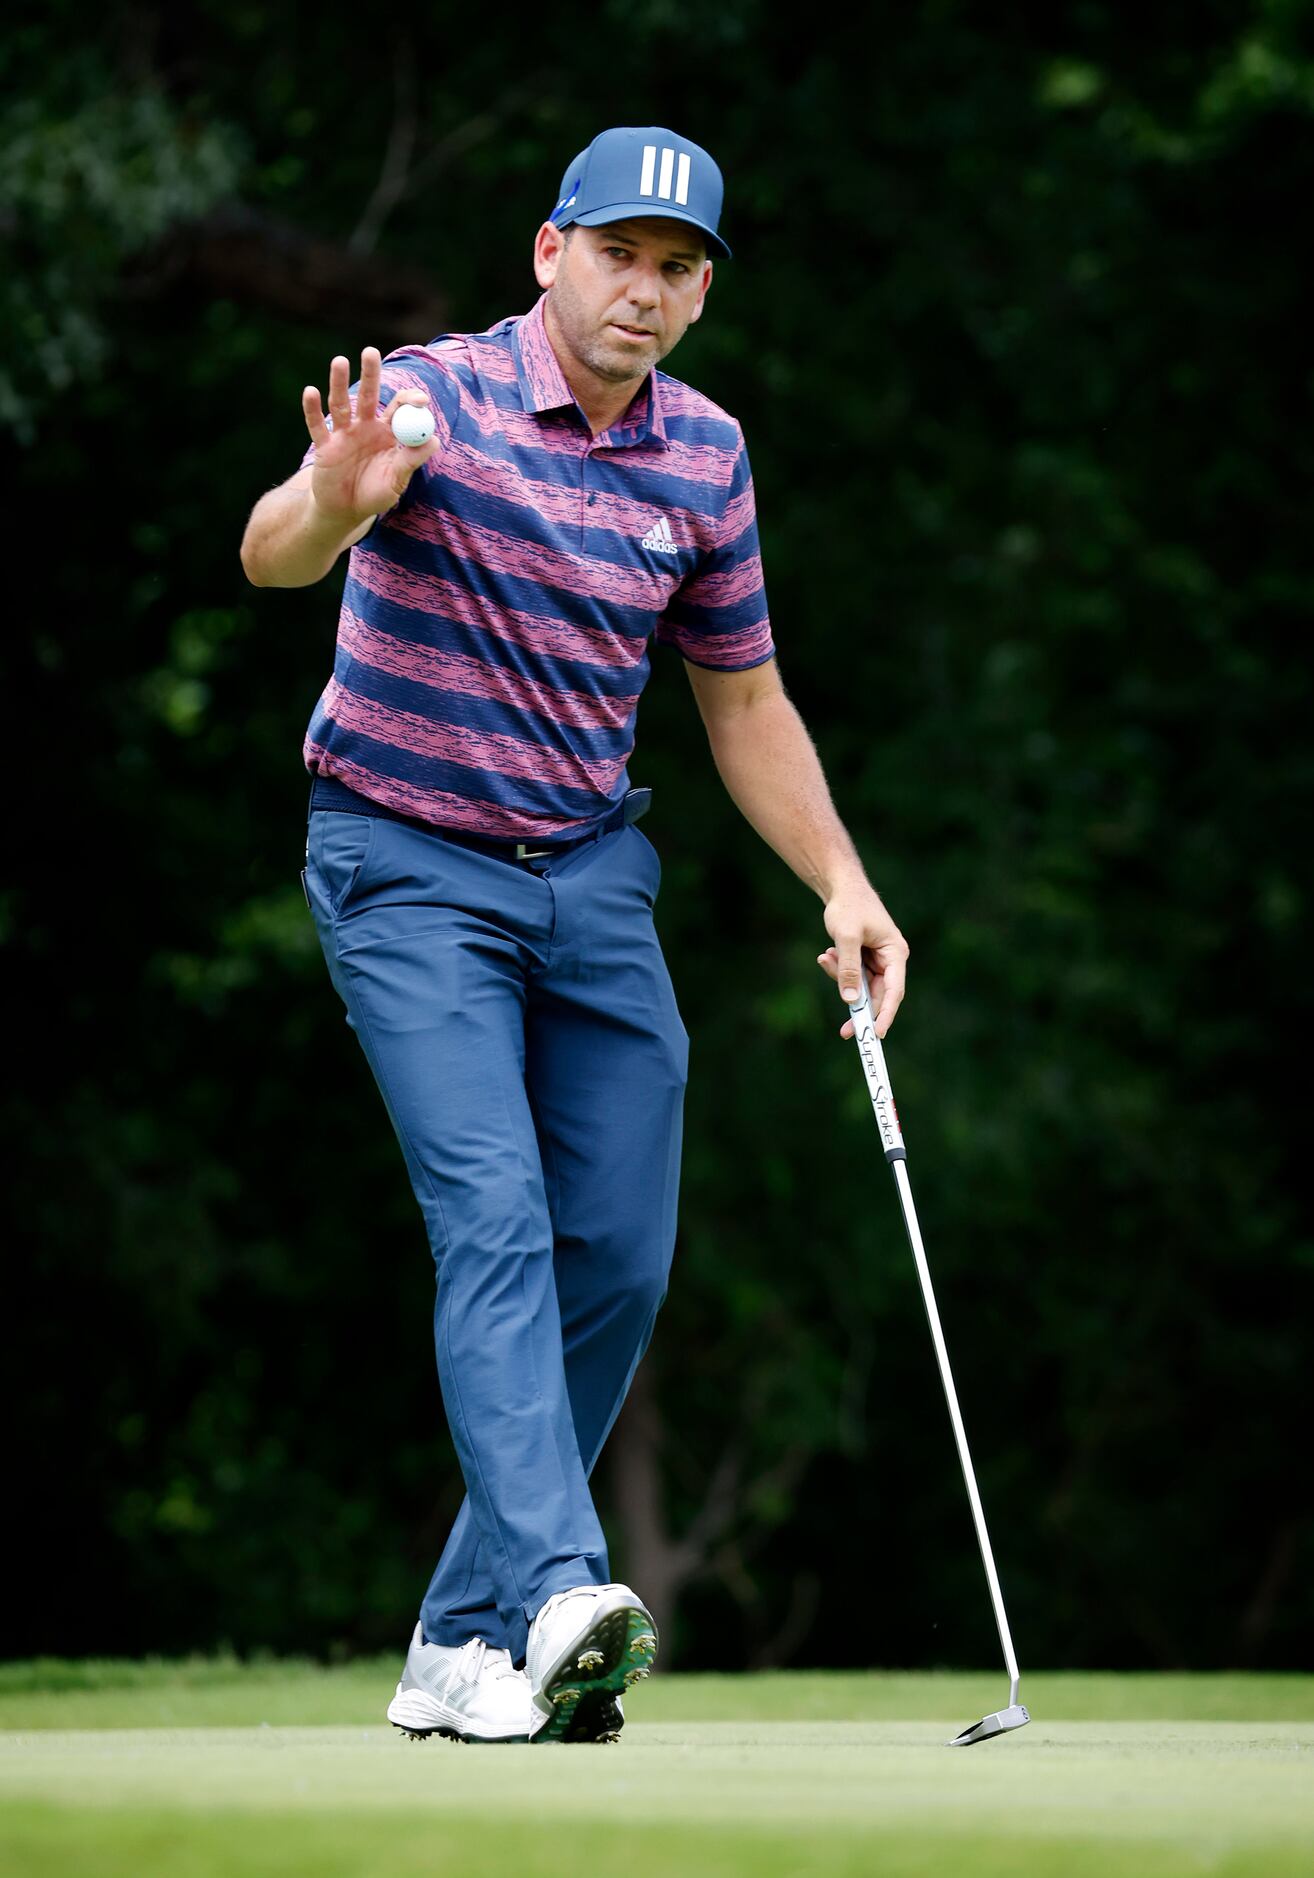 Professional golfer Sergio Garcia acknowledges the applause after putting on No. 5 during...